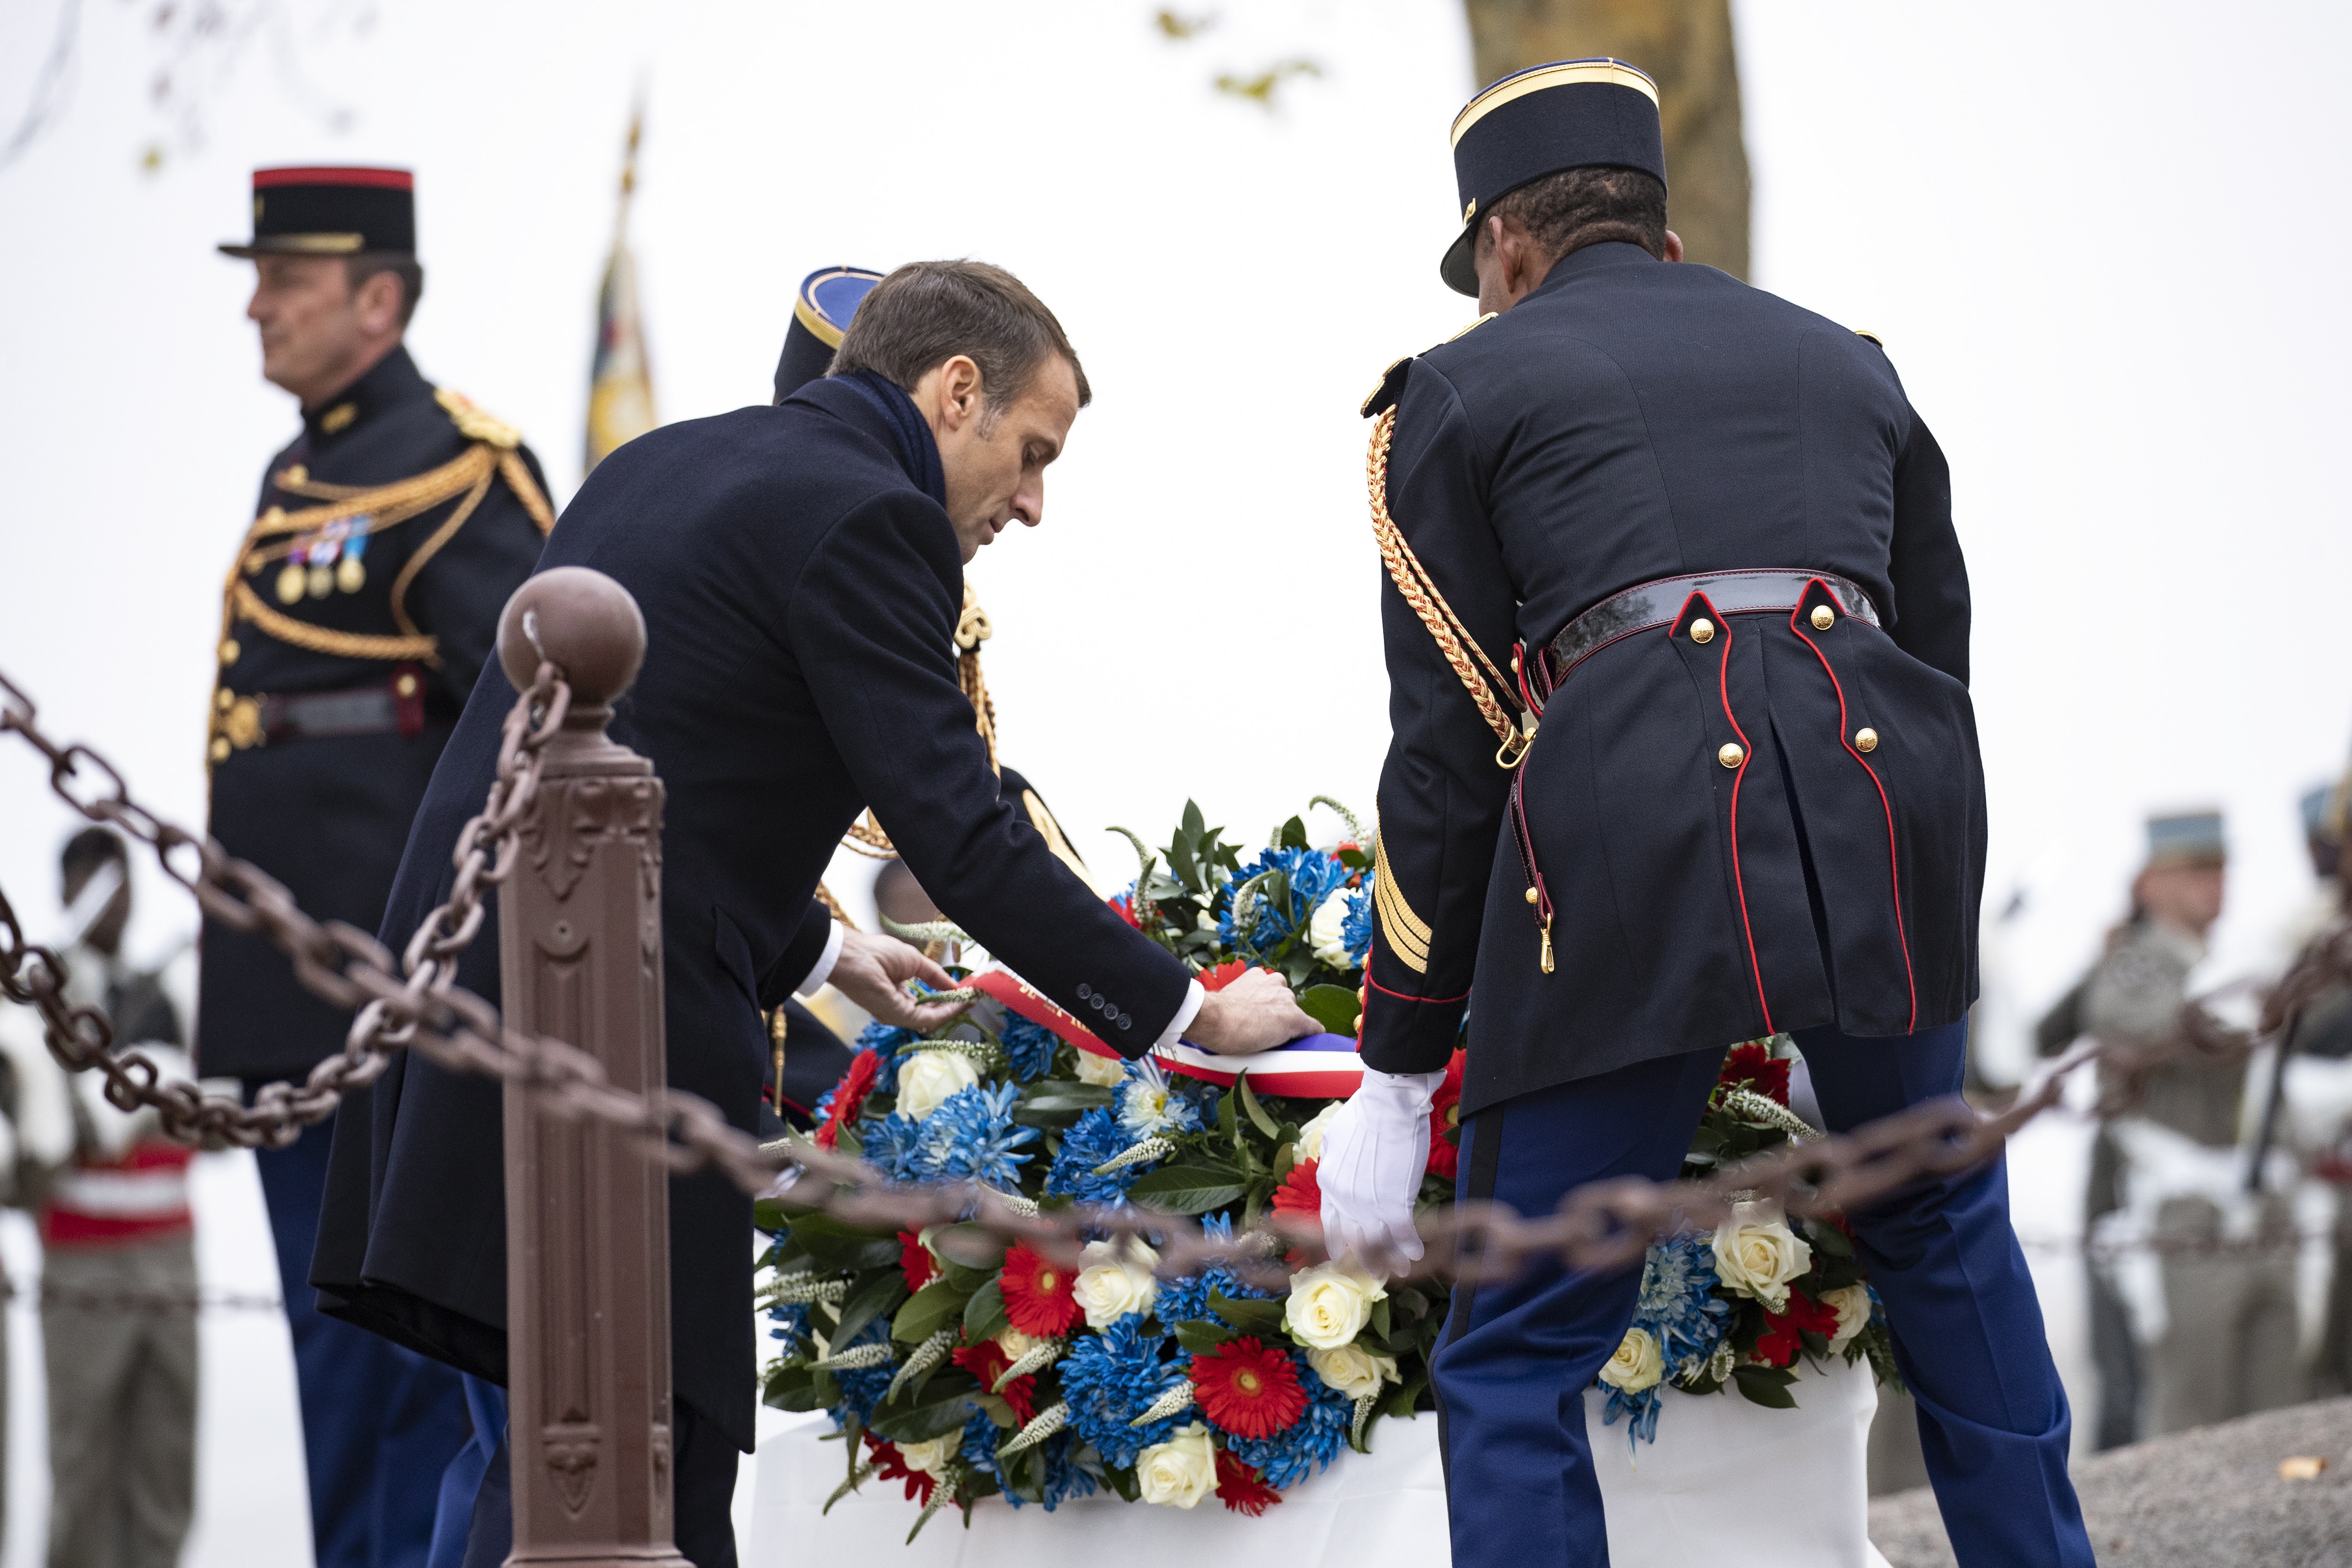 epa07142398 French President Emmanuel Macron attends a ceremony to honor the memory of the French soldiers who died during the Frontiers  Battle on August 1914, in Morhange, France, 05 November 2018. French President Emmanuel Macron is currently on a six-day tour to visit the most iconic landmarks of the First World War ahead of the celebrations of the 100th anniversary of the 11 November 1918 armistice.  EPA/ETIENNE LAURENT